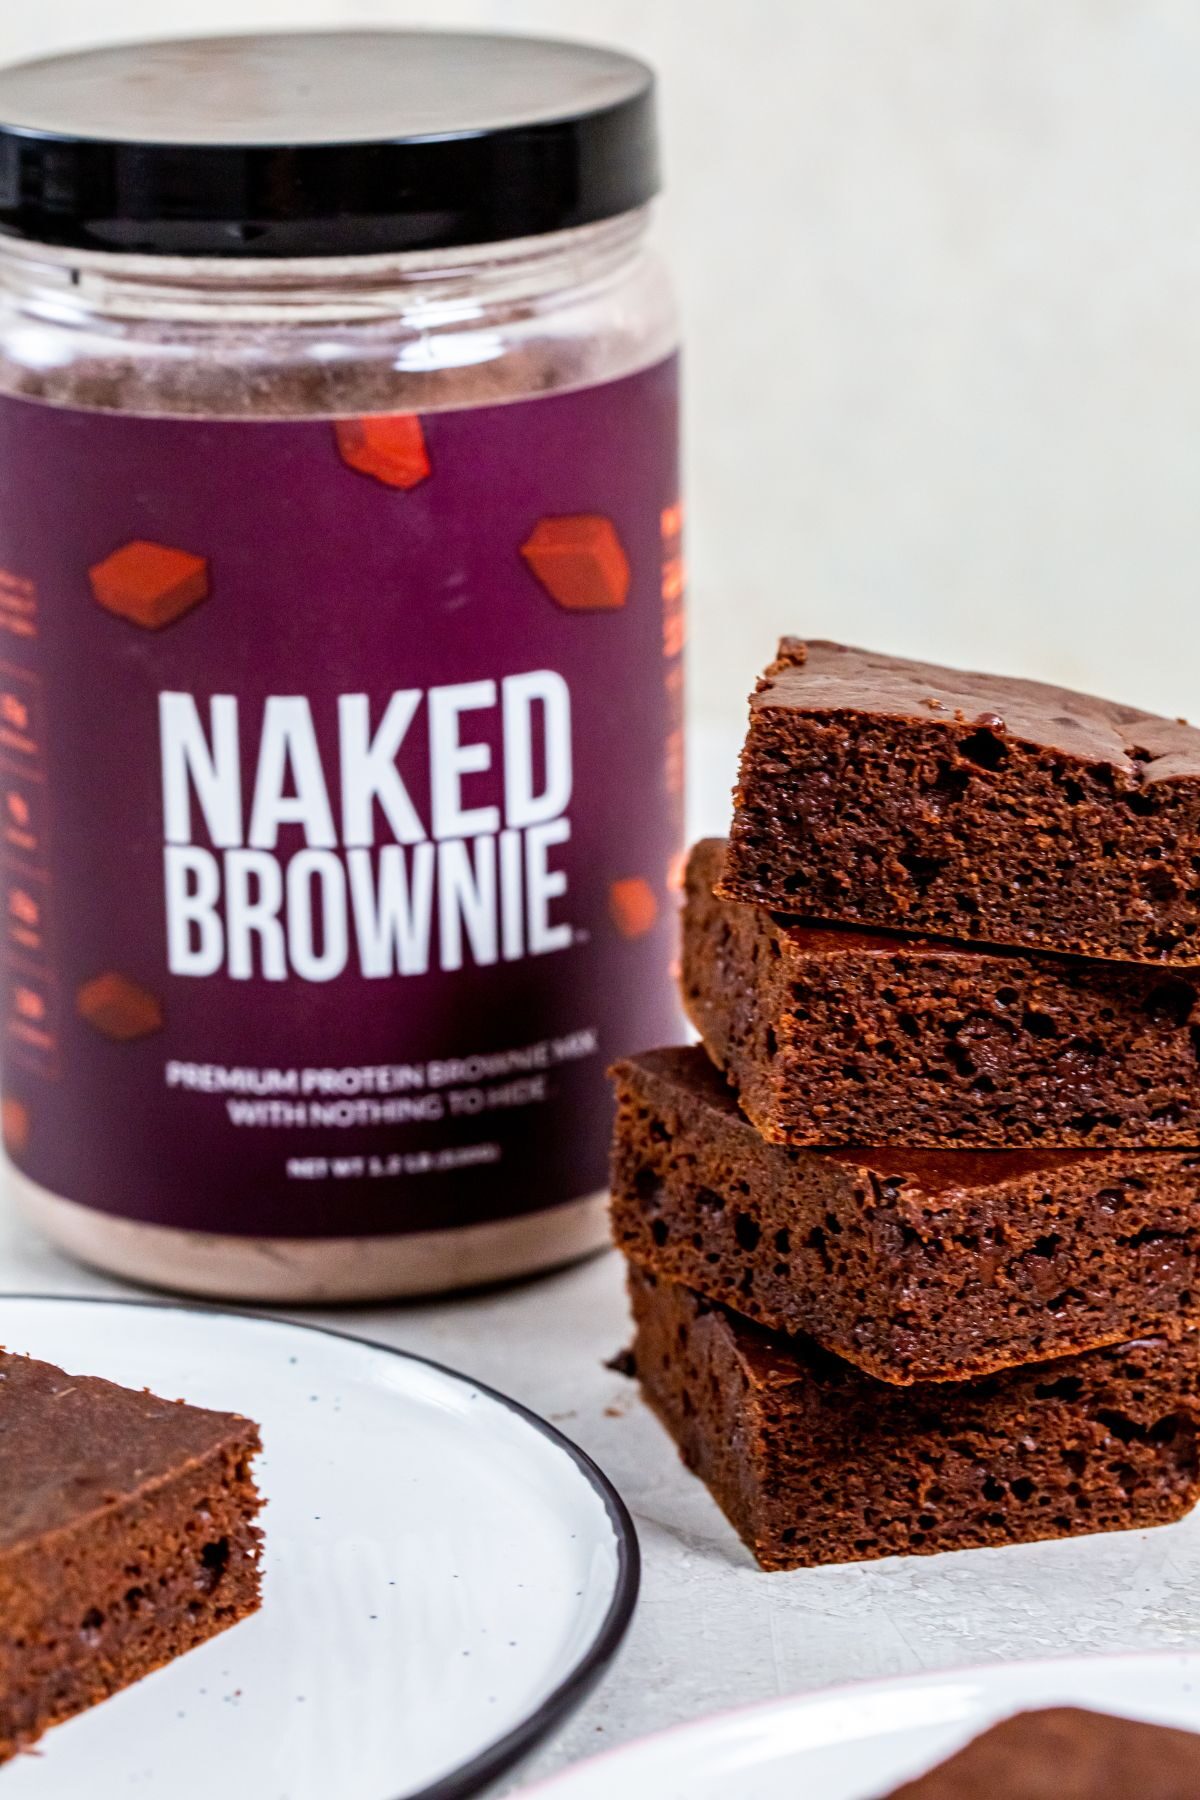 naked brownie brownie container with baked brownies